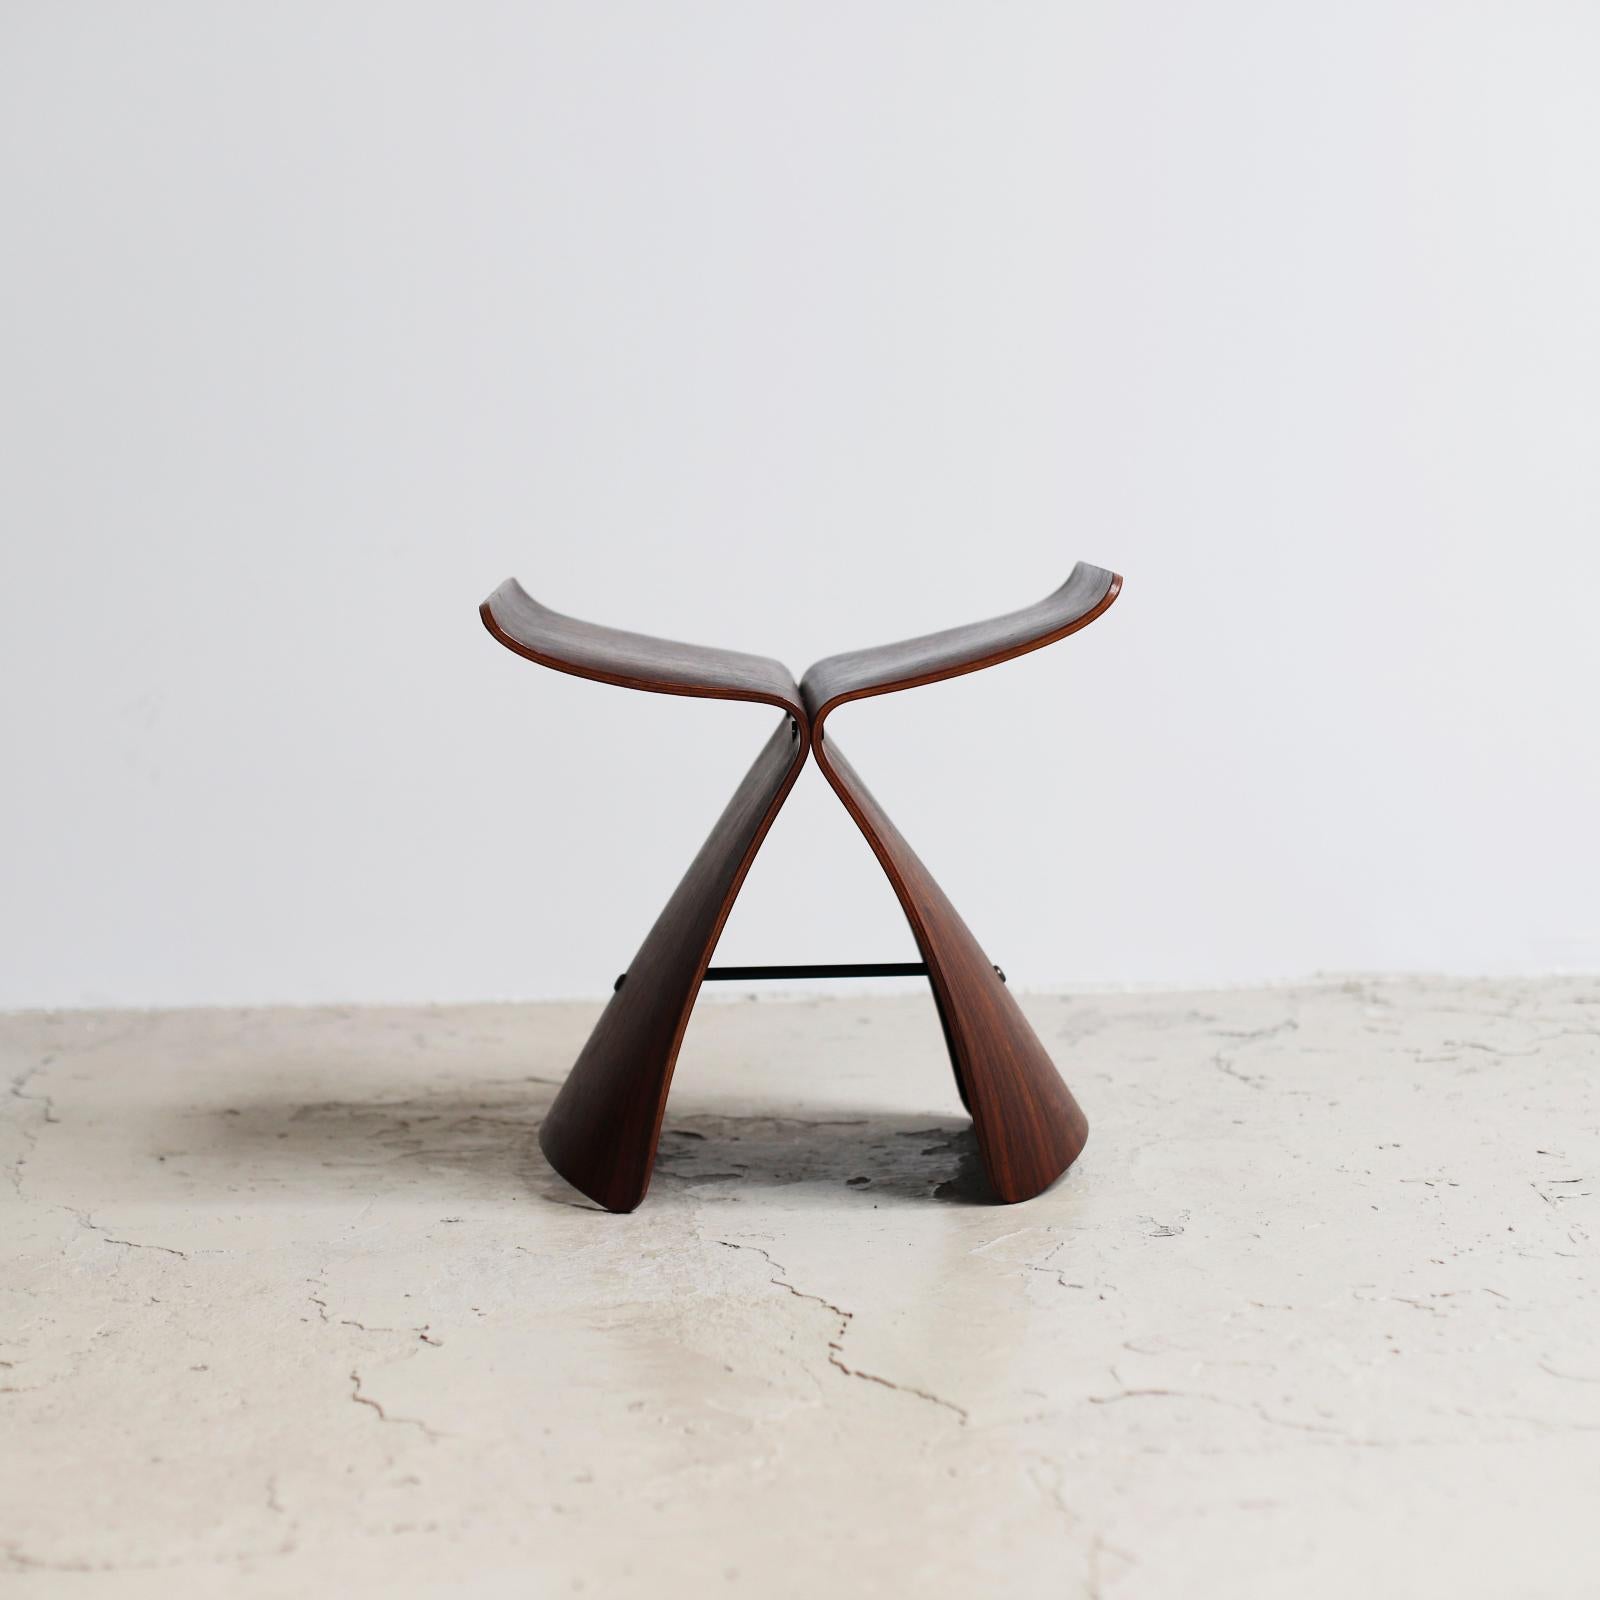 Rare butterfly stool designed by Sori Yanagi, manufactured by Tendo in Japan.
The work was published in 1956.
The oval Tendo (????) seals were used in the 1950s and 1960s.